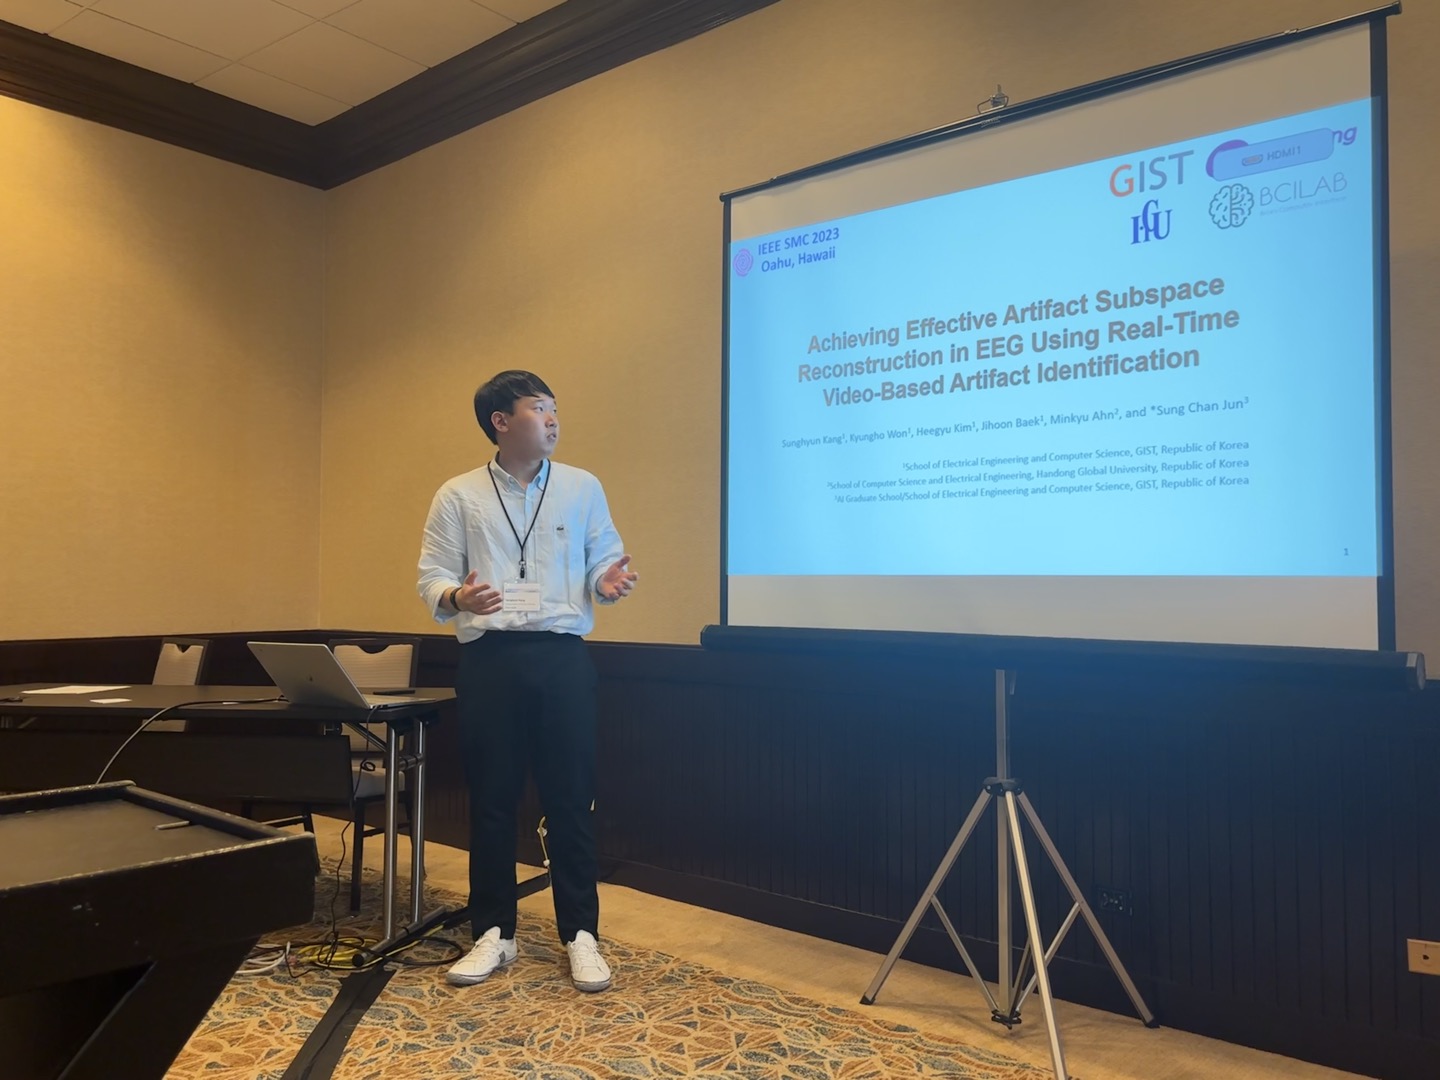 GIST master's student Sunghyun Kang wins the best student paper award at an international academic conference (IEEE SMC 2023) 이미지